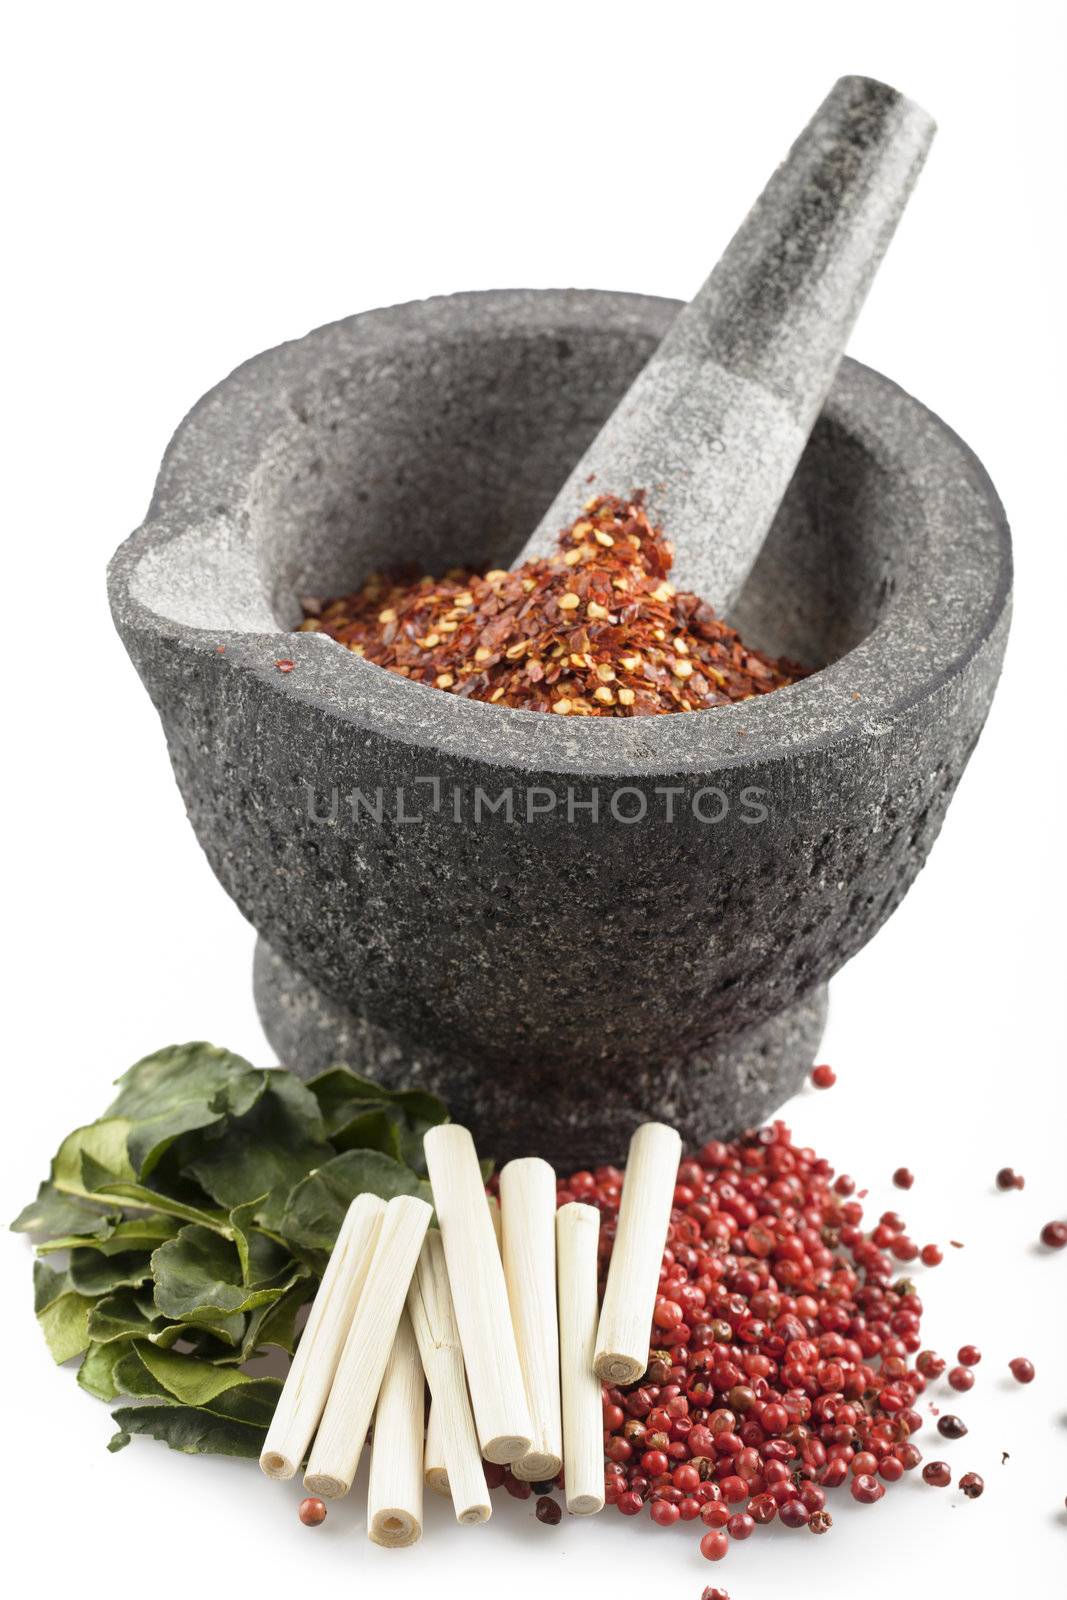 Kaffir lime leaves, lemon grass, pink peppercorns and a mortar and pestle with crusthed pepper.